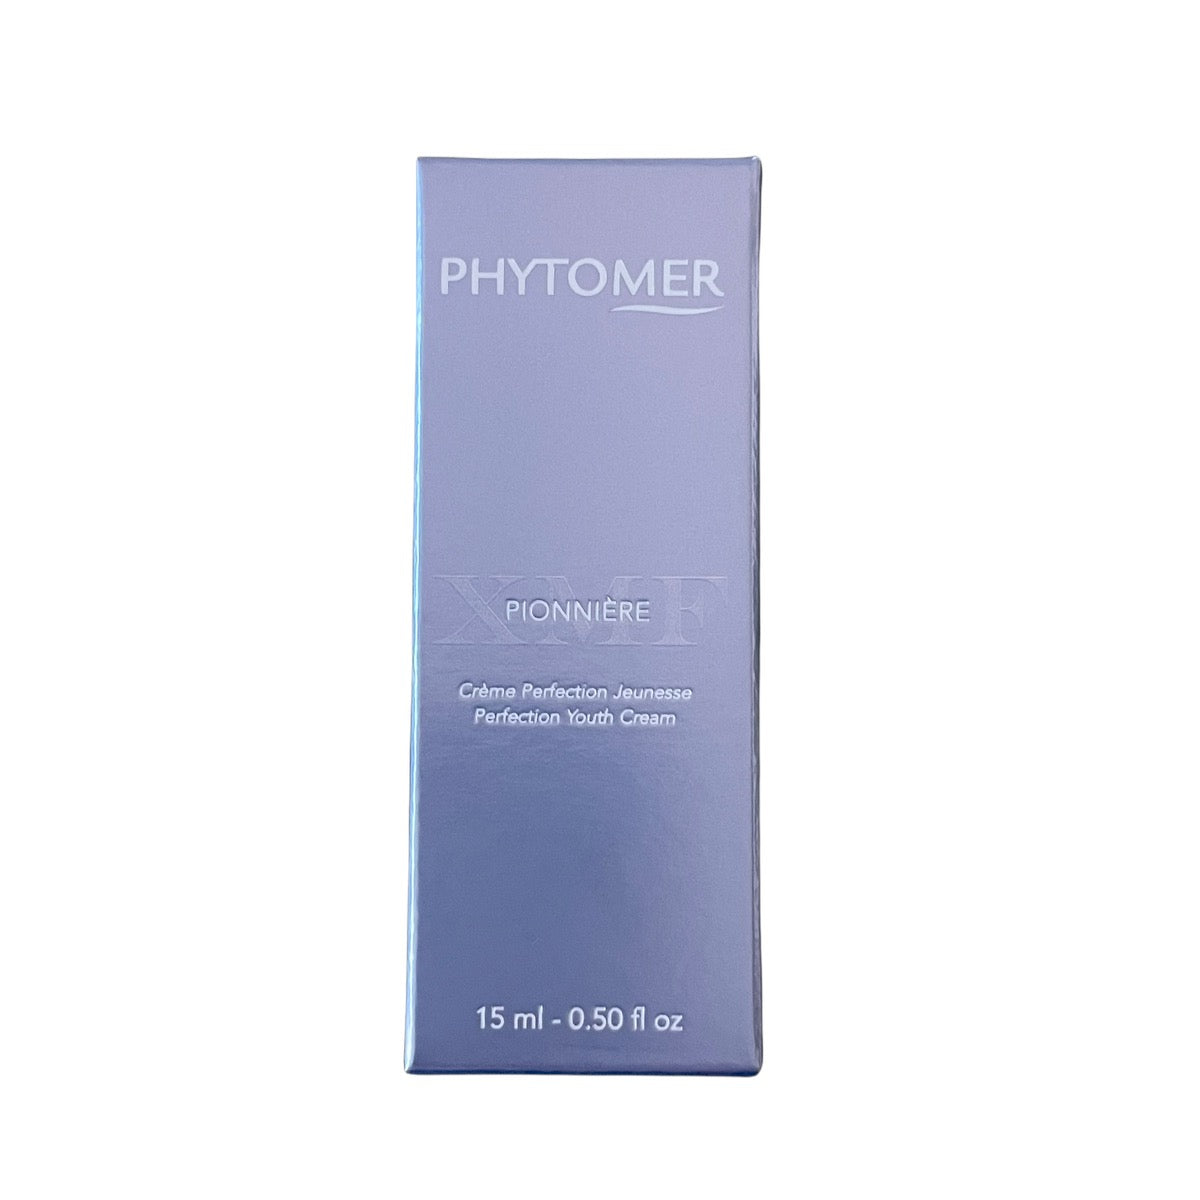 Phytomer Pionnière XMF Perfection Youth Cream (Travel-size)